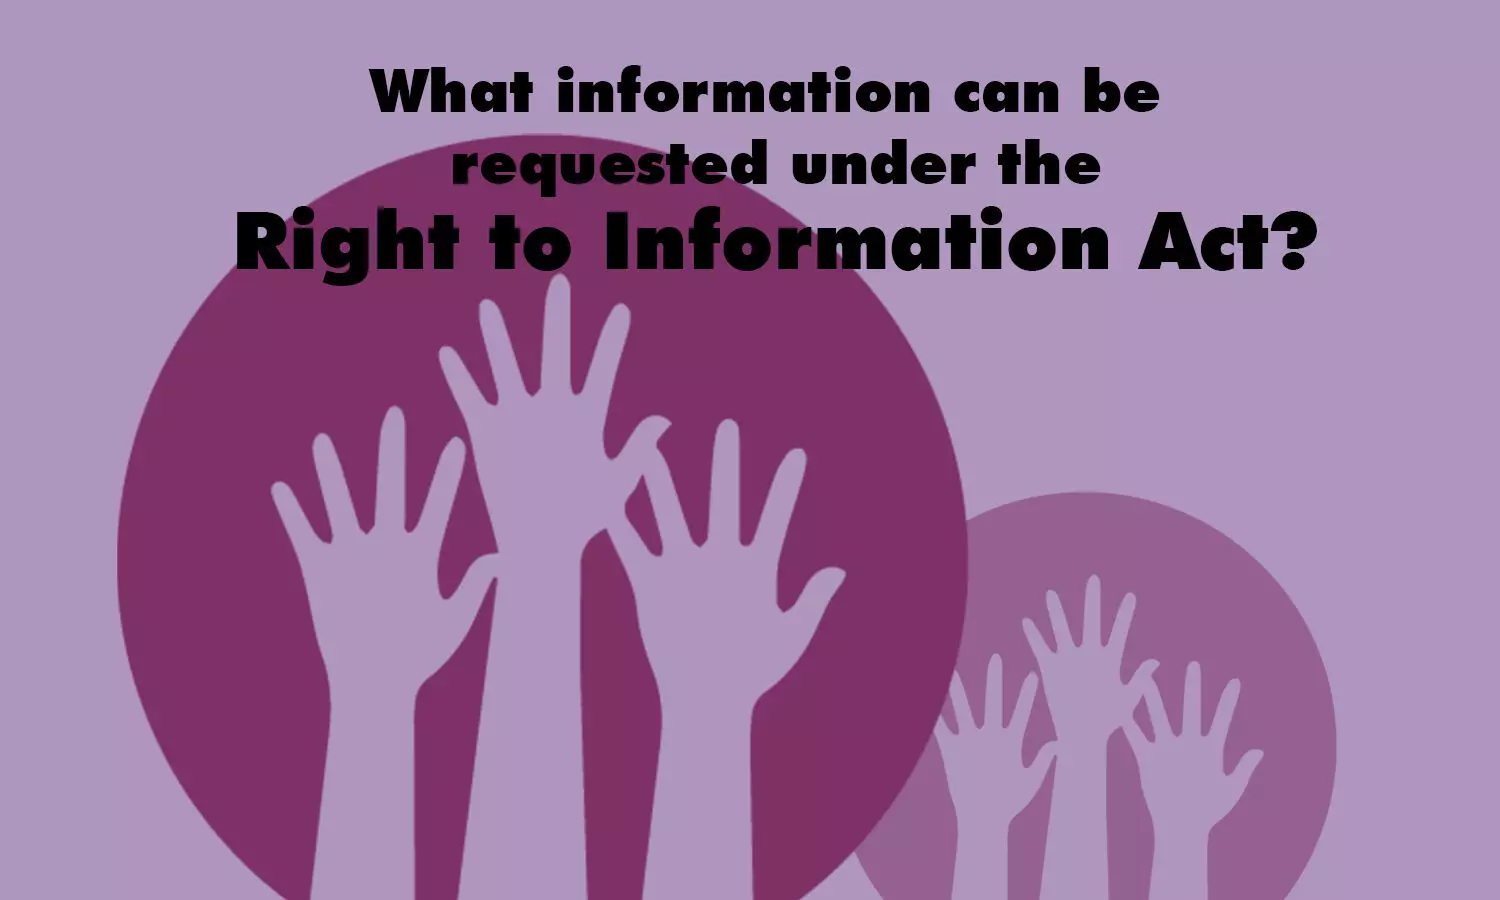 What information can be requested under the Right to Information Act?